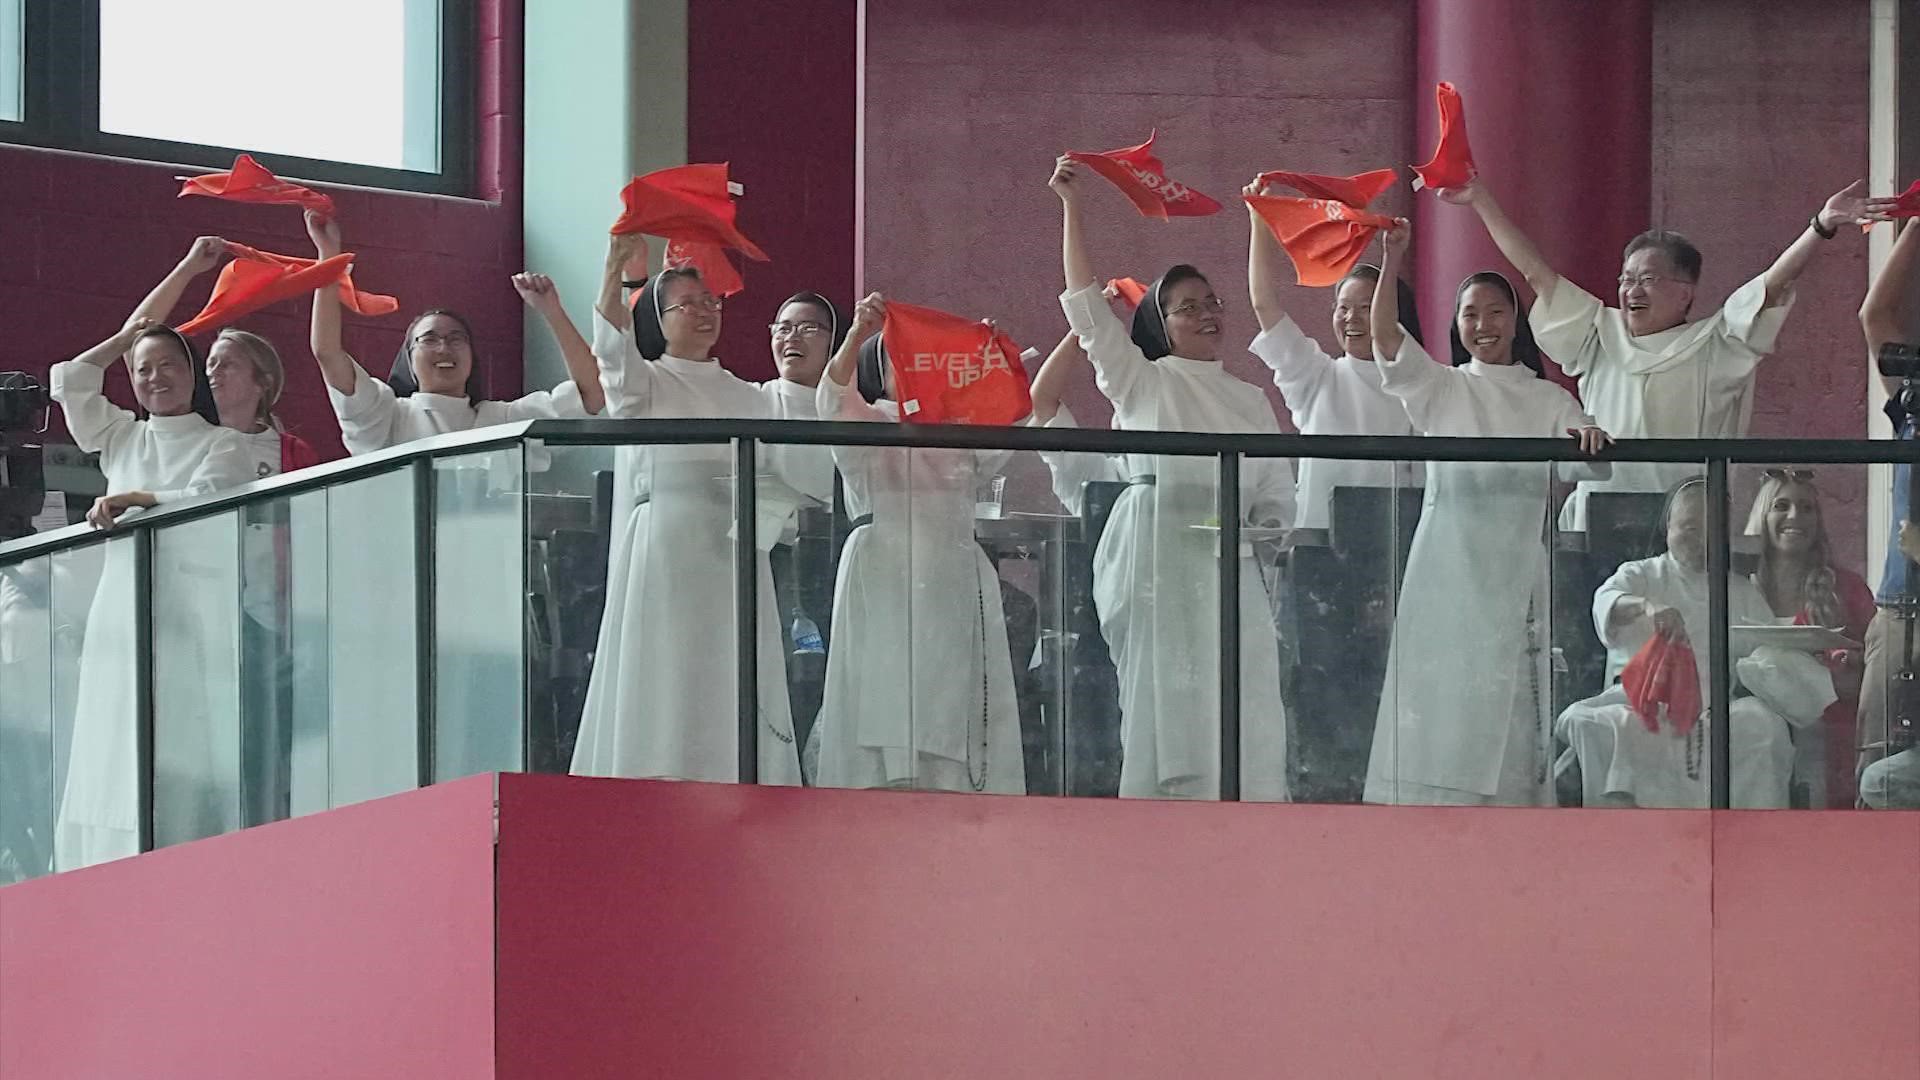 The "Rally Nuns" returned to Minute Maid Park for Game 2 of the ALDS. The "Rally Nuns" were prominent figures during the 'Stros playoff run last year.